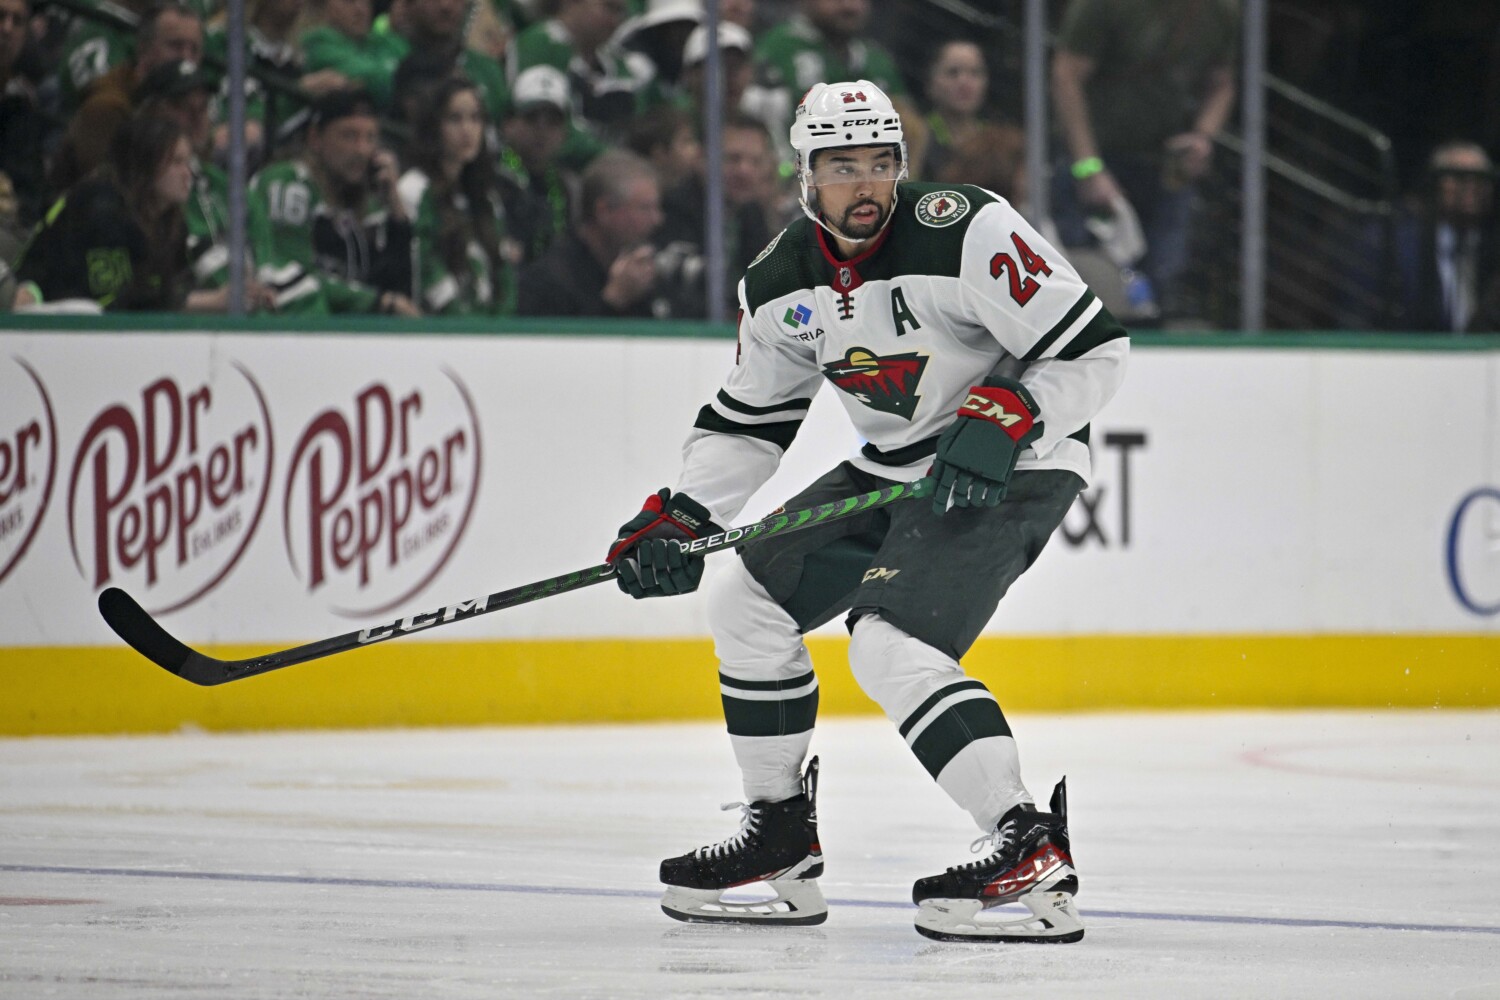 NHL Rumors Where could unrestricted free agent Matt Dumba end up